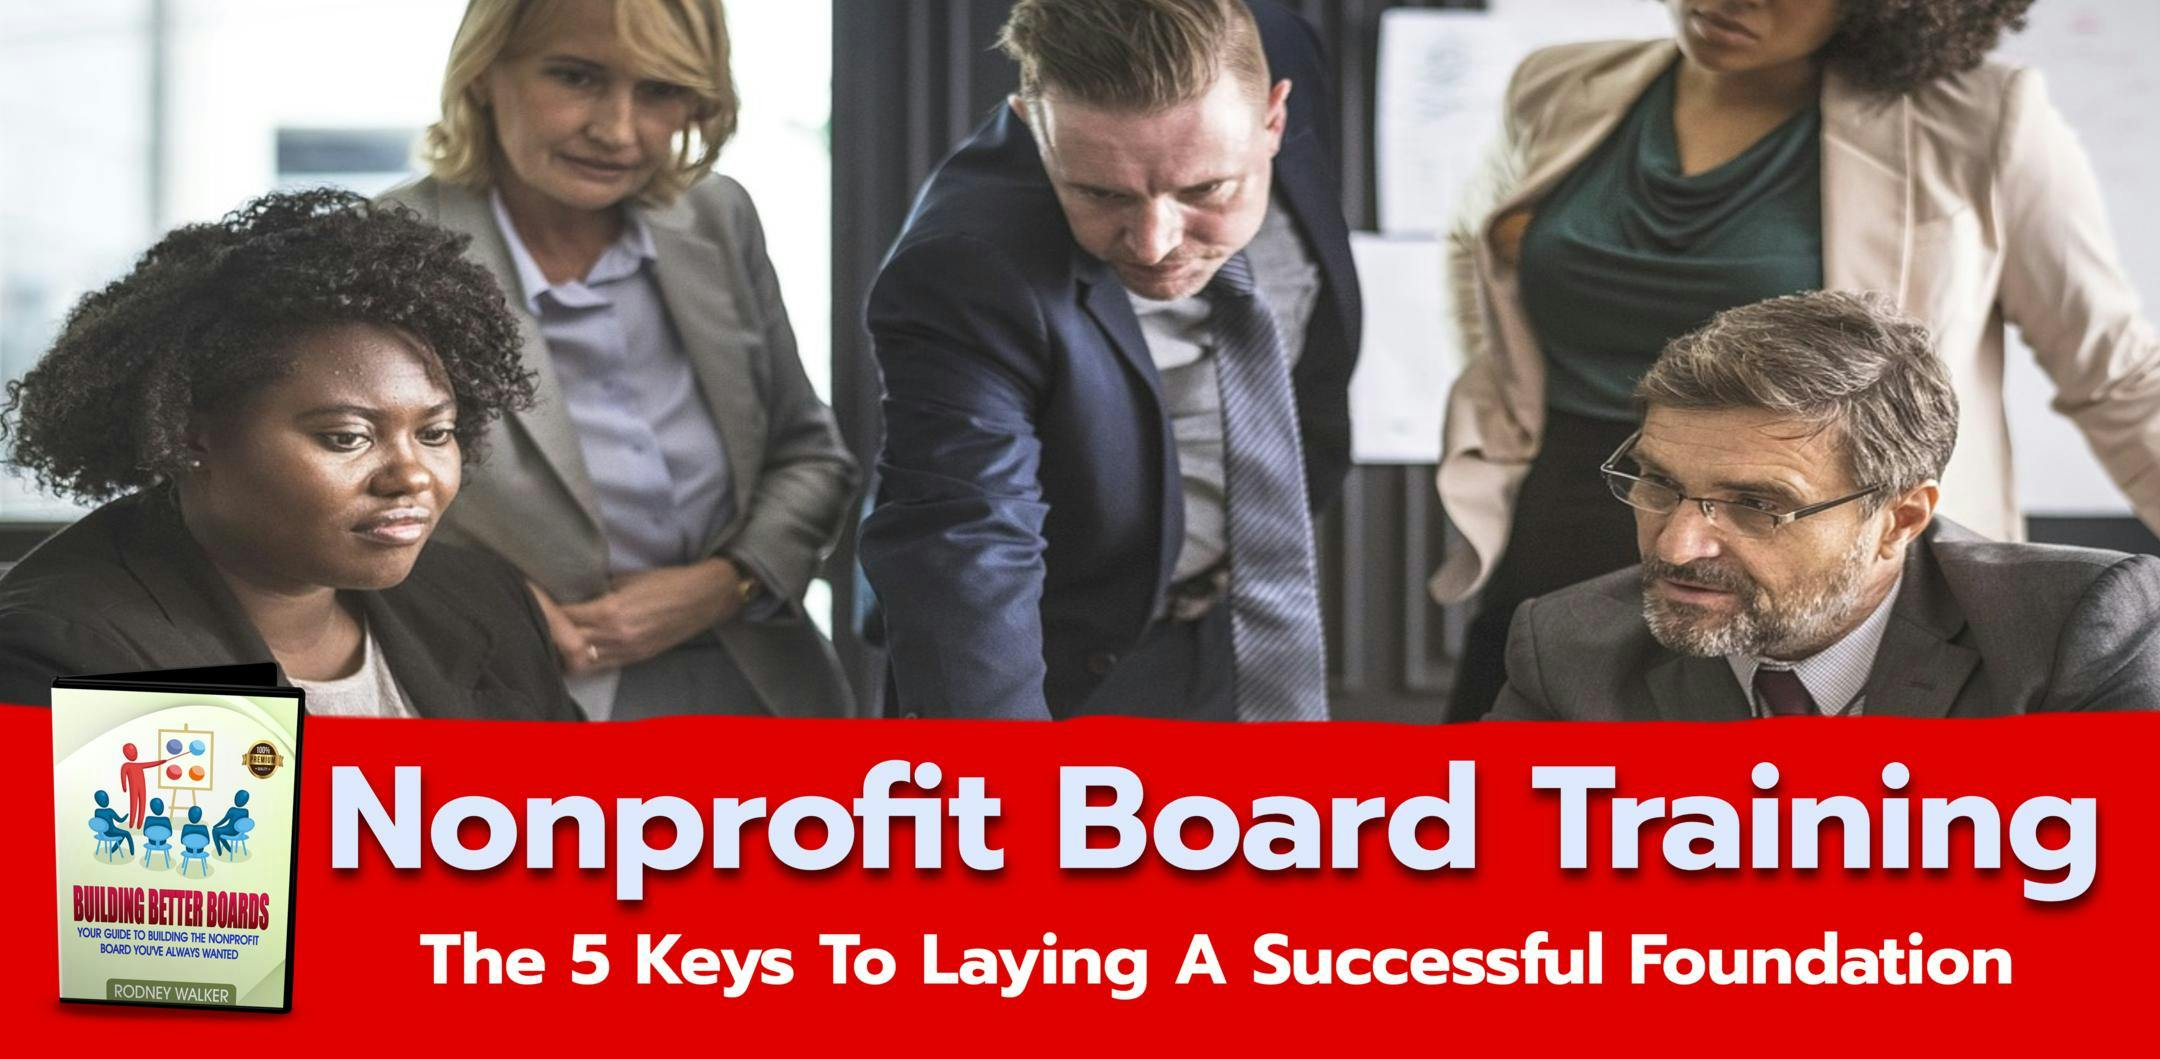 How To Build a Successful Nonprofit Board - Syracuse, New York